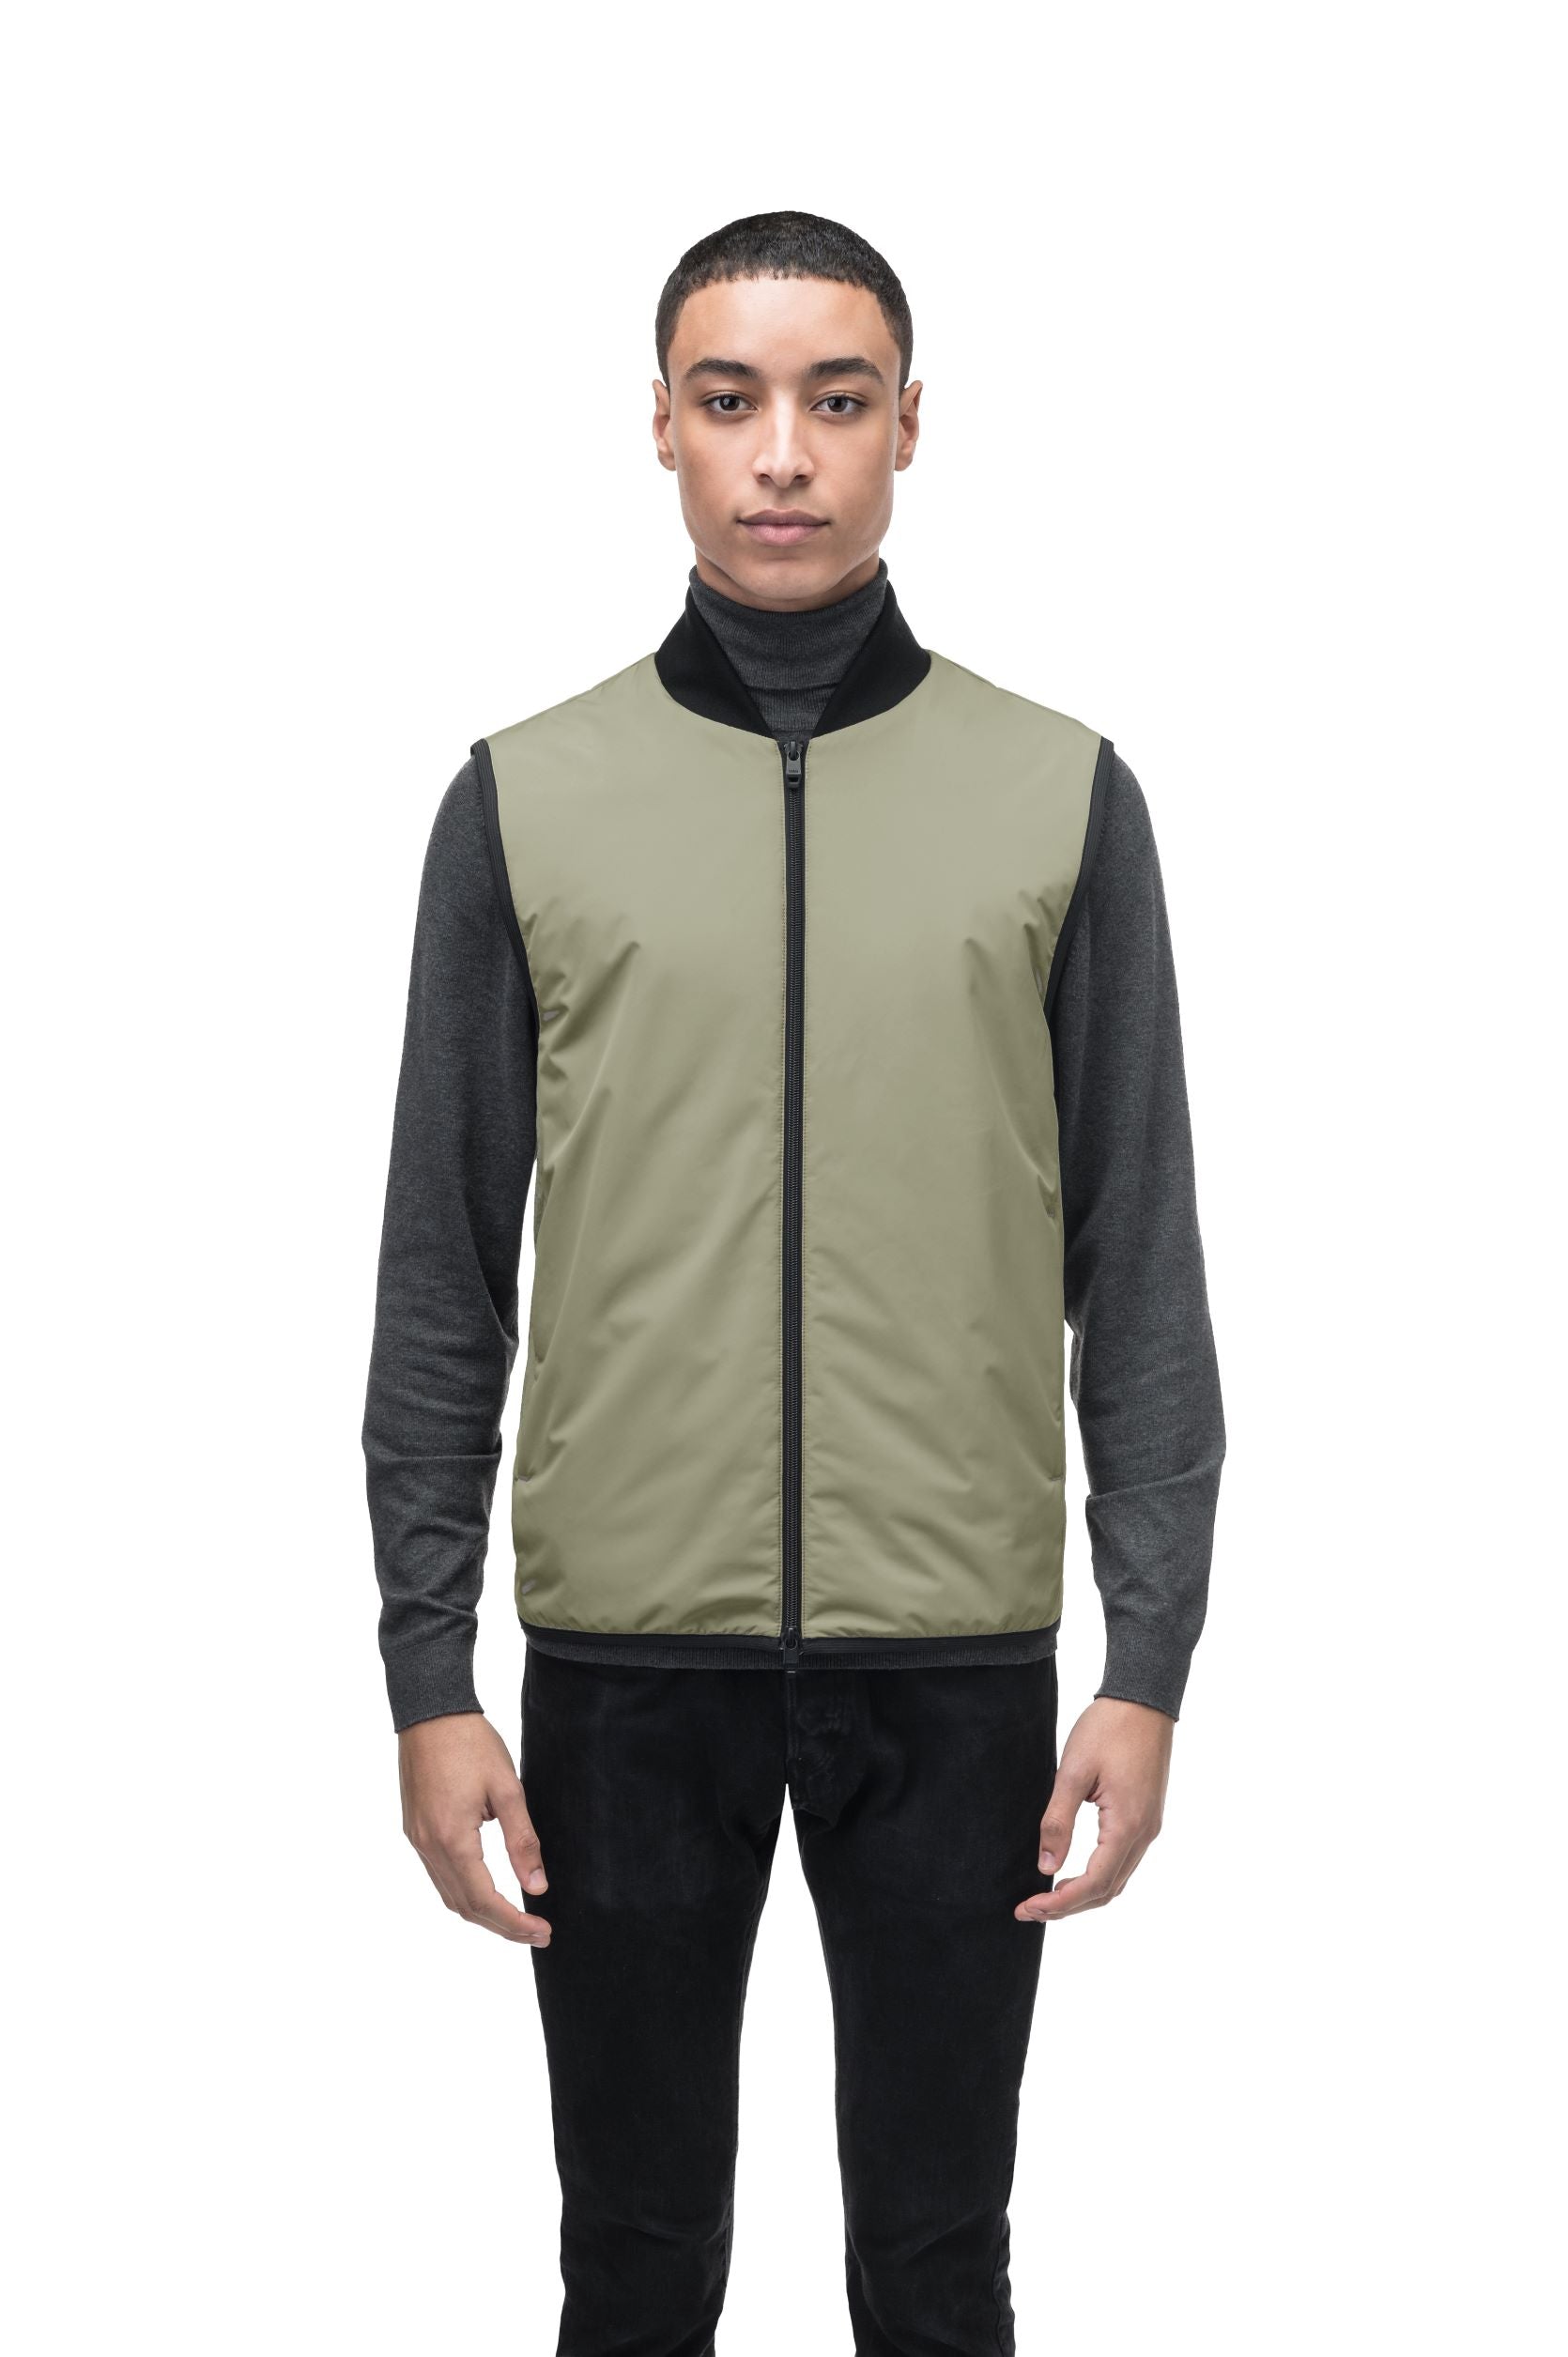 Neo Men's Mid Layer Vest in hip length, Primaloft Gold Insulation Active+, and two-way zipper, in Tea